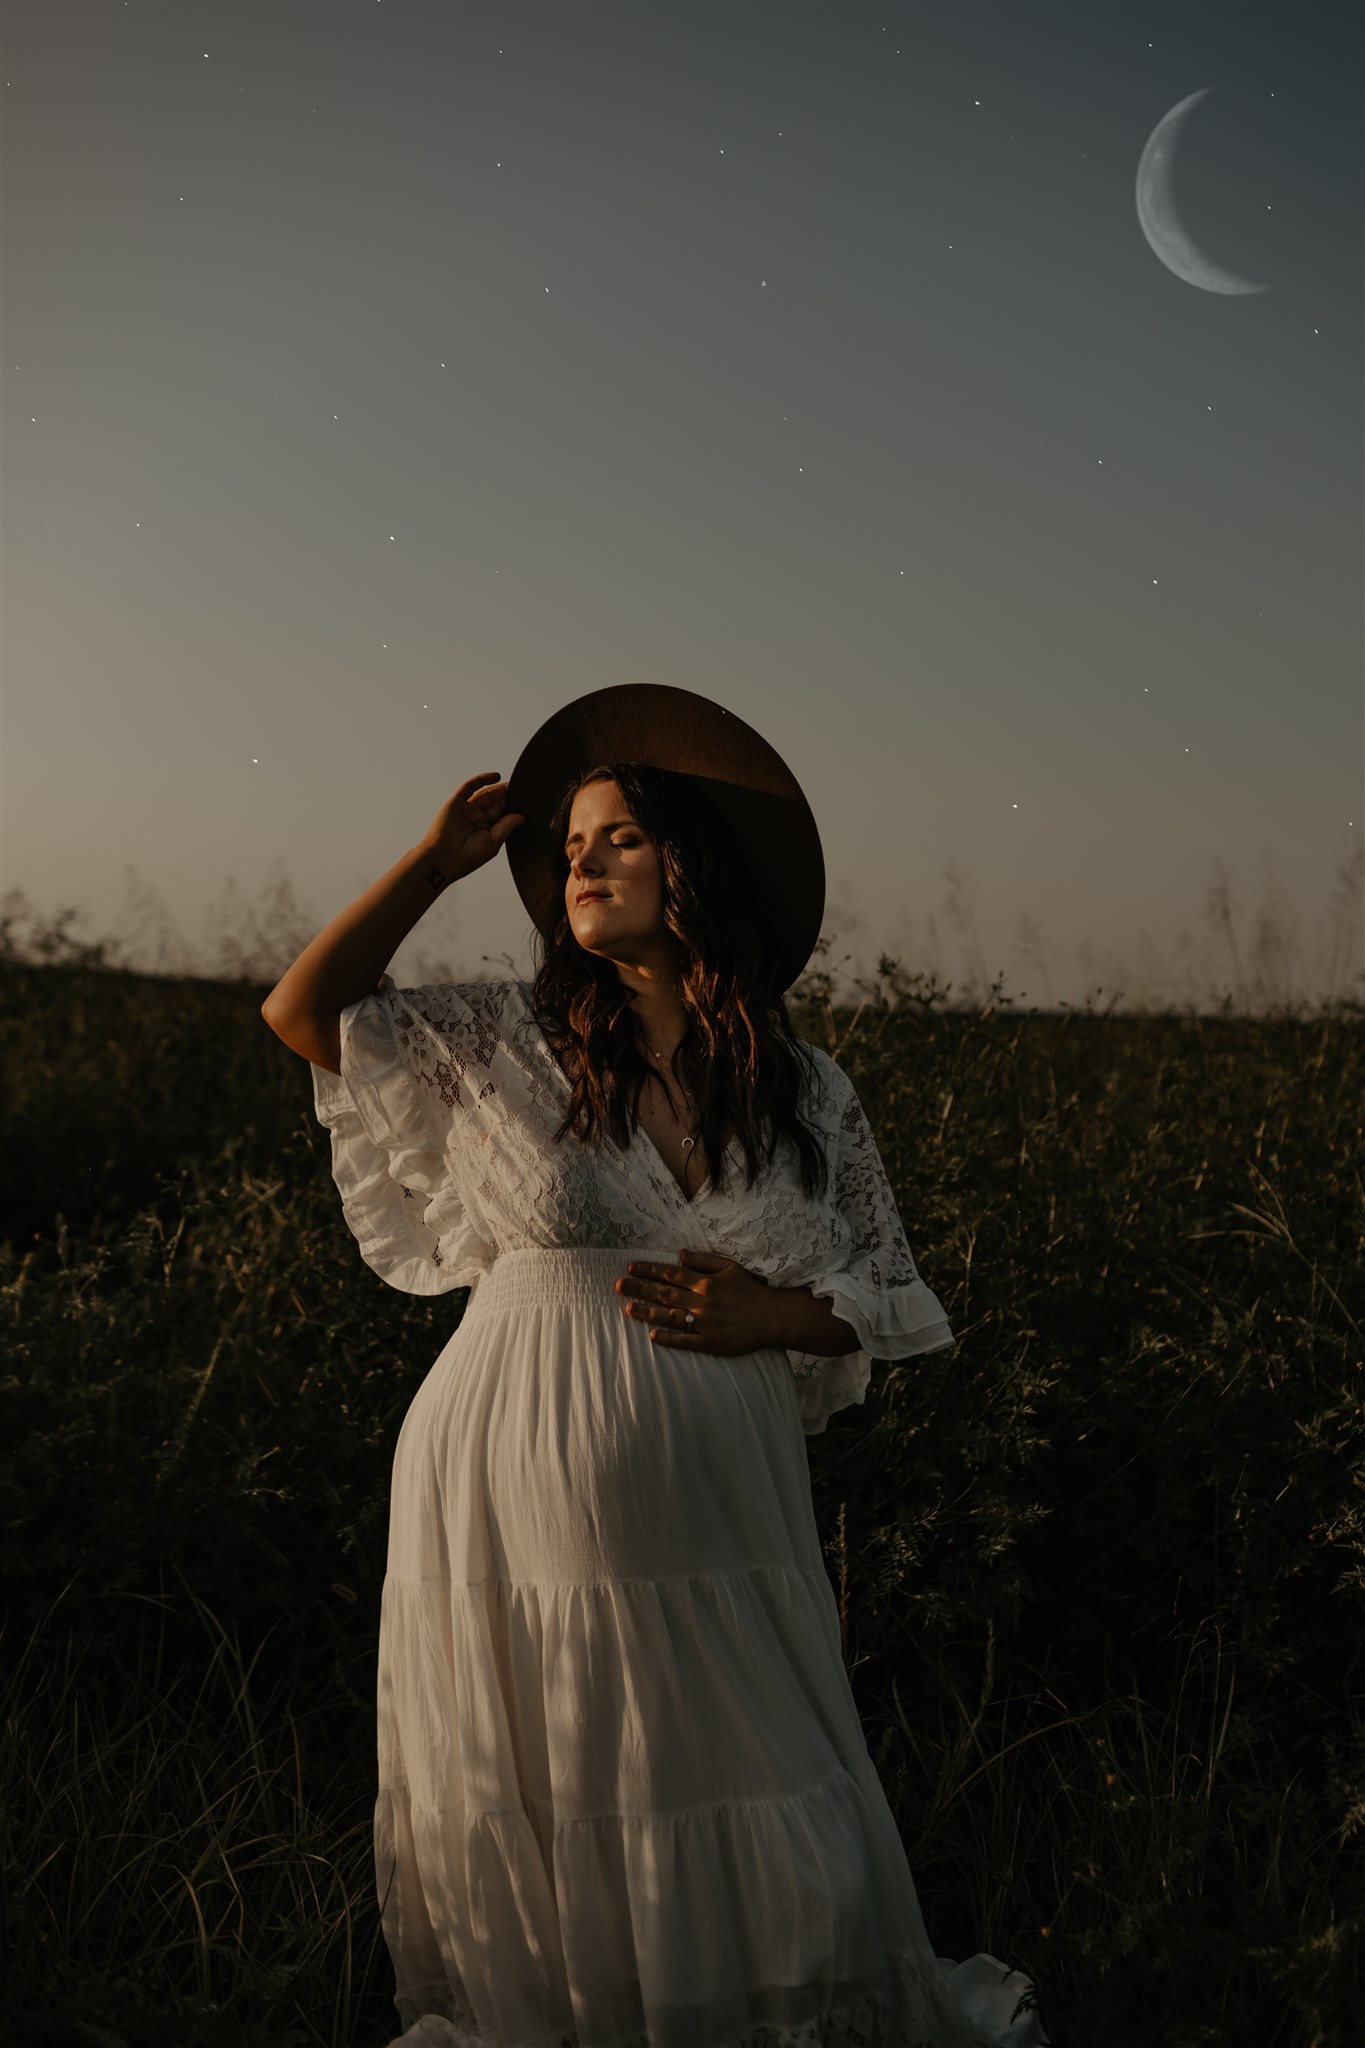 Serene pregnant woman in sunset field with the moon in the background. She has a hand on her belly and on her hat brim